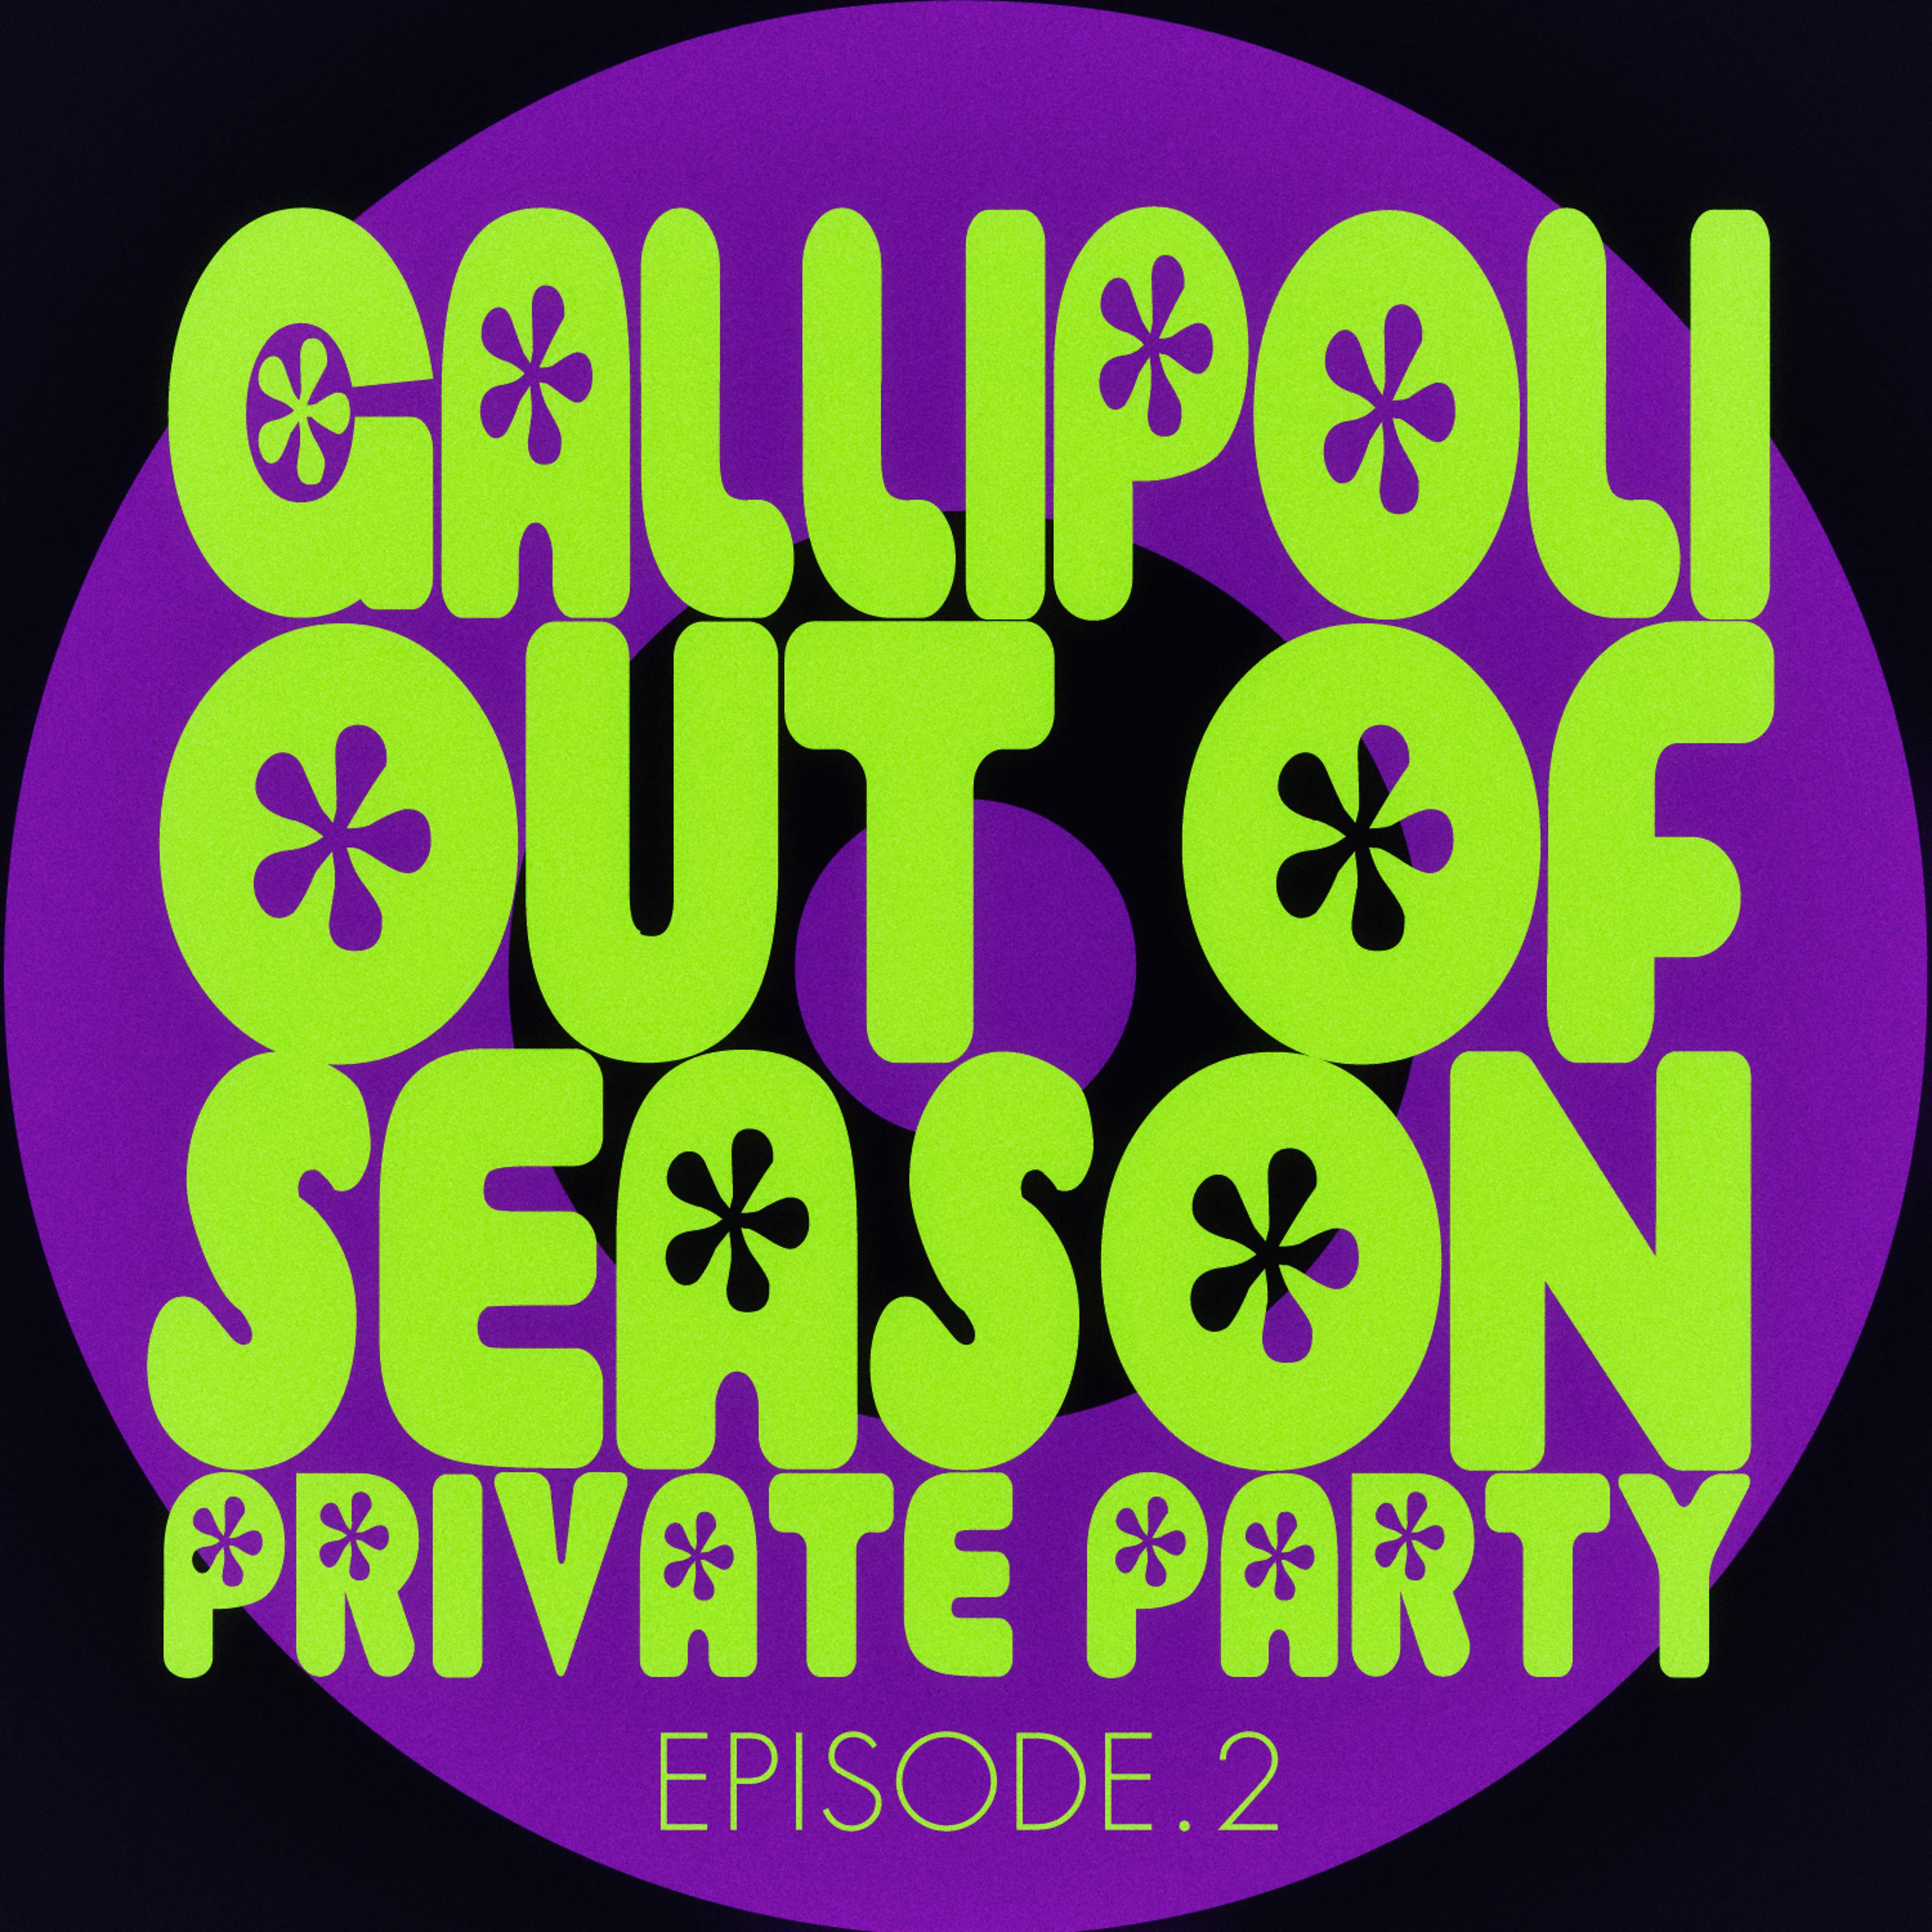 Постер альбома #gallipoli out of Season Private Party - Episode.2